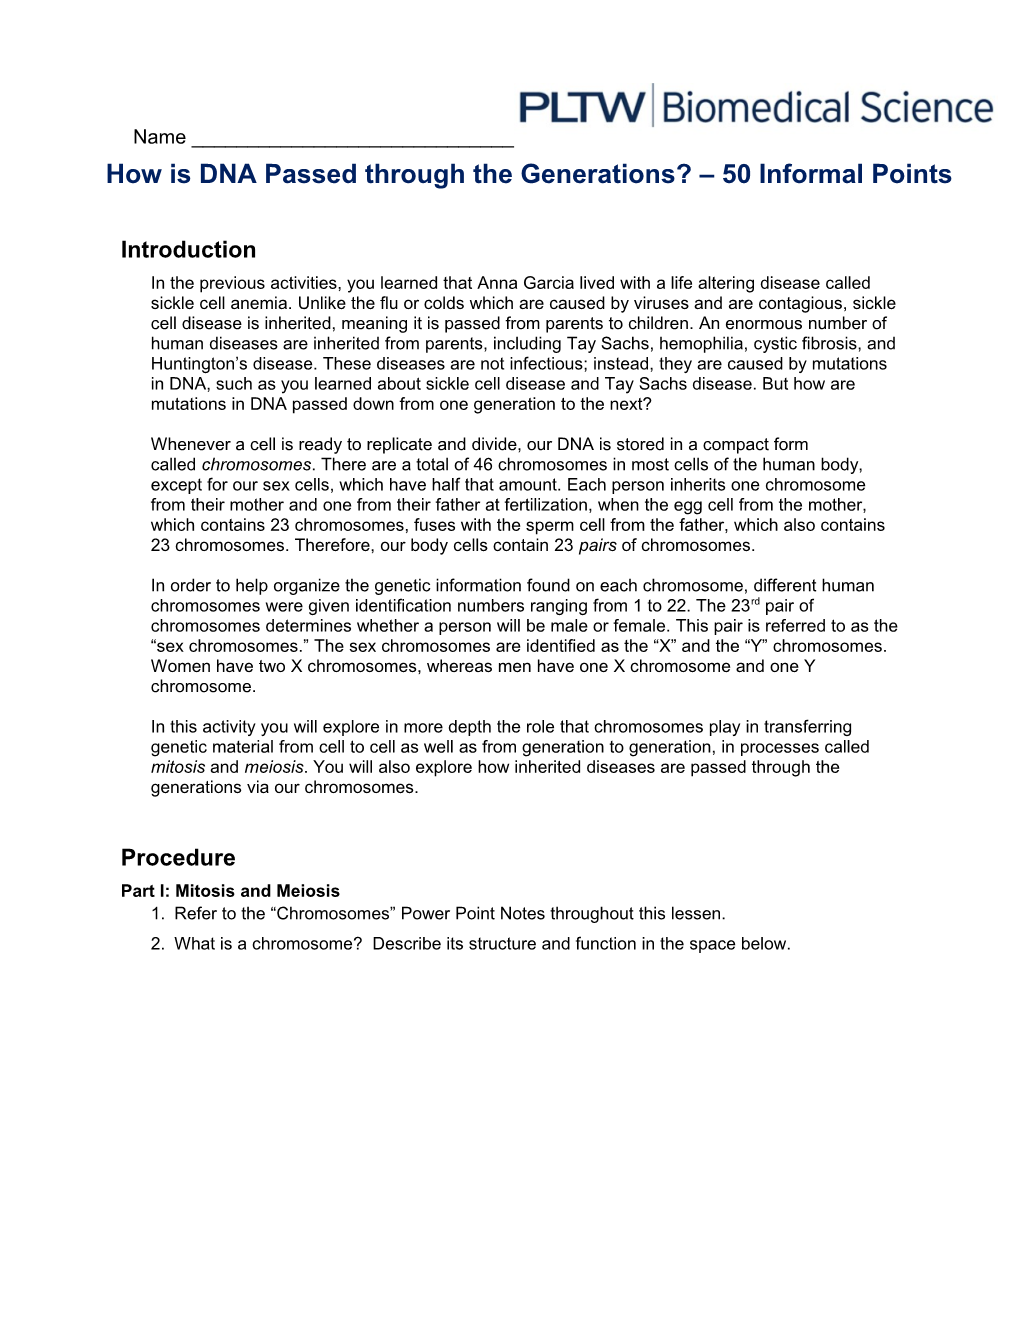 How Is DNA Passed Through the Generations? 50 Informal Points